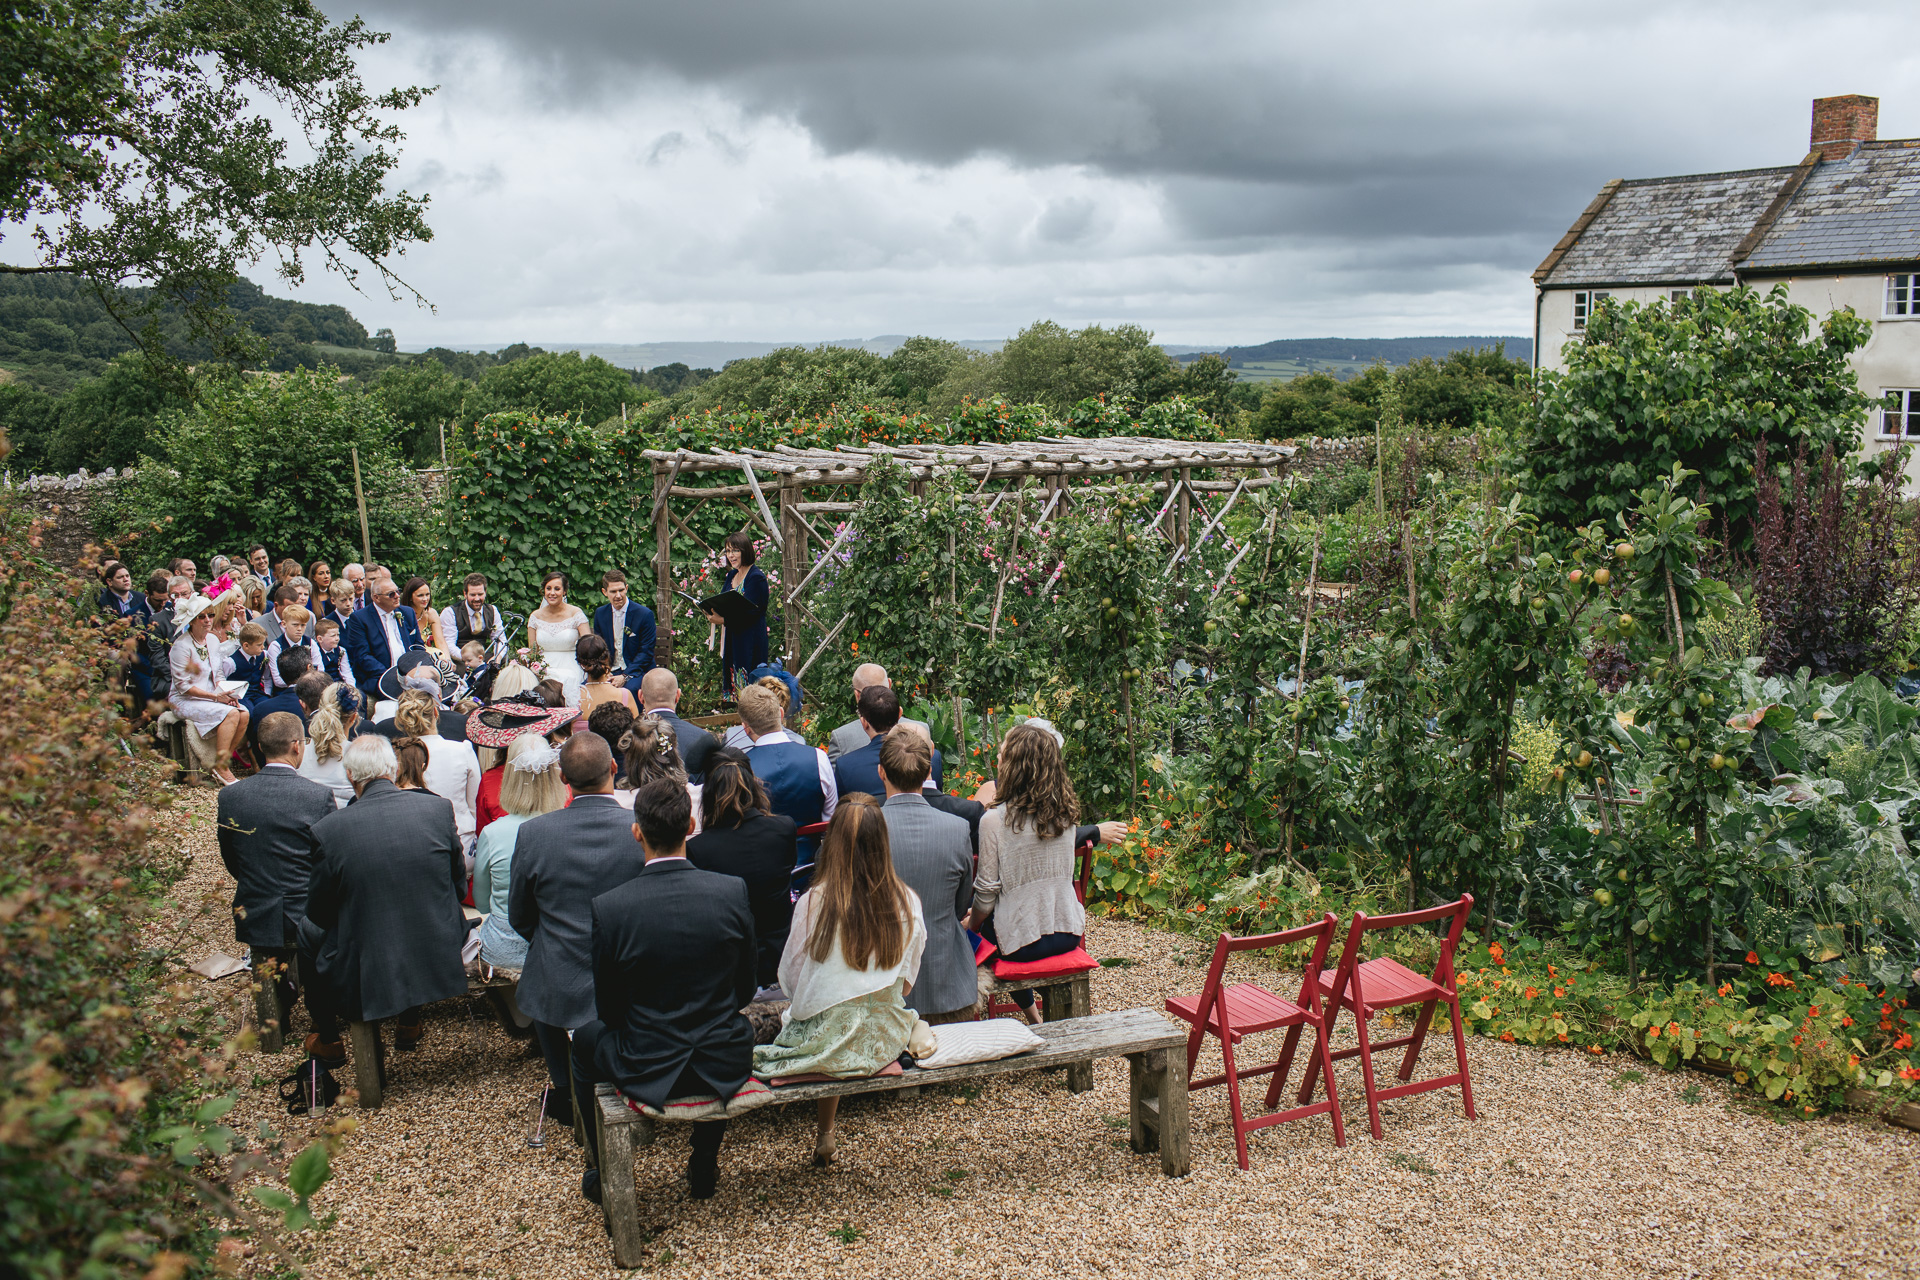 An outdoor humanist ceremony in the kitchen garden with rain clouds in the sky. 